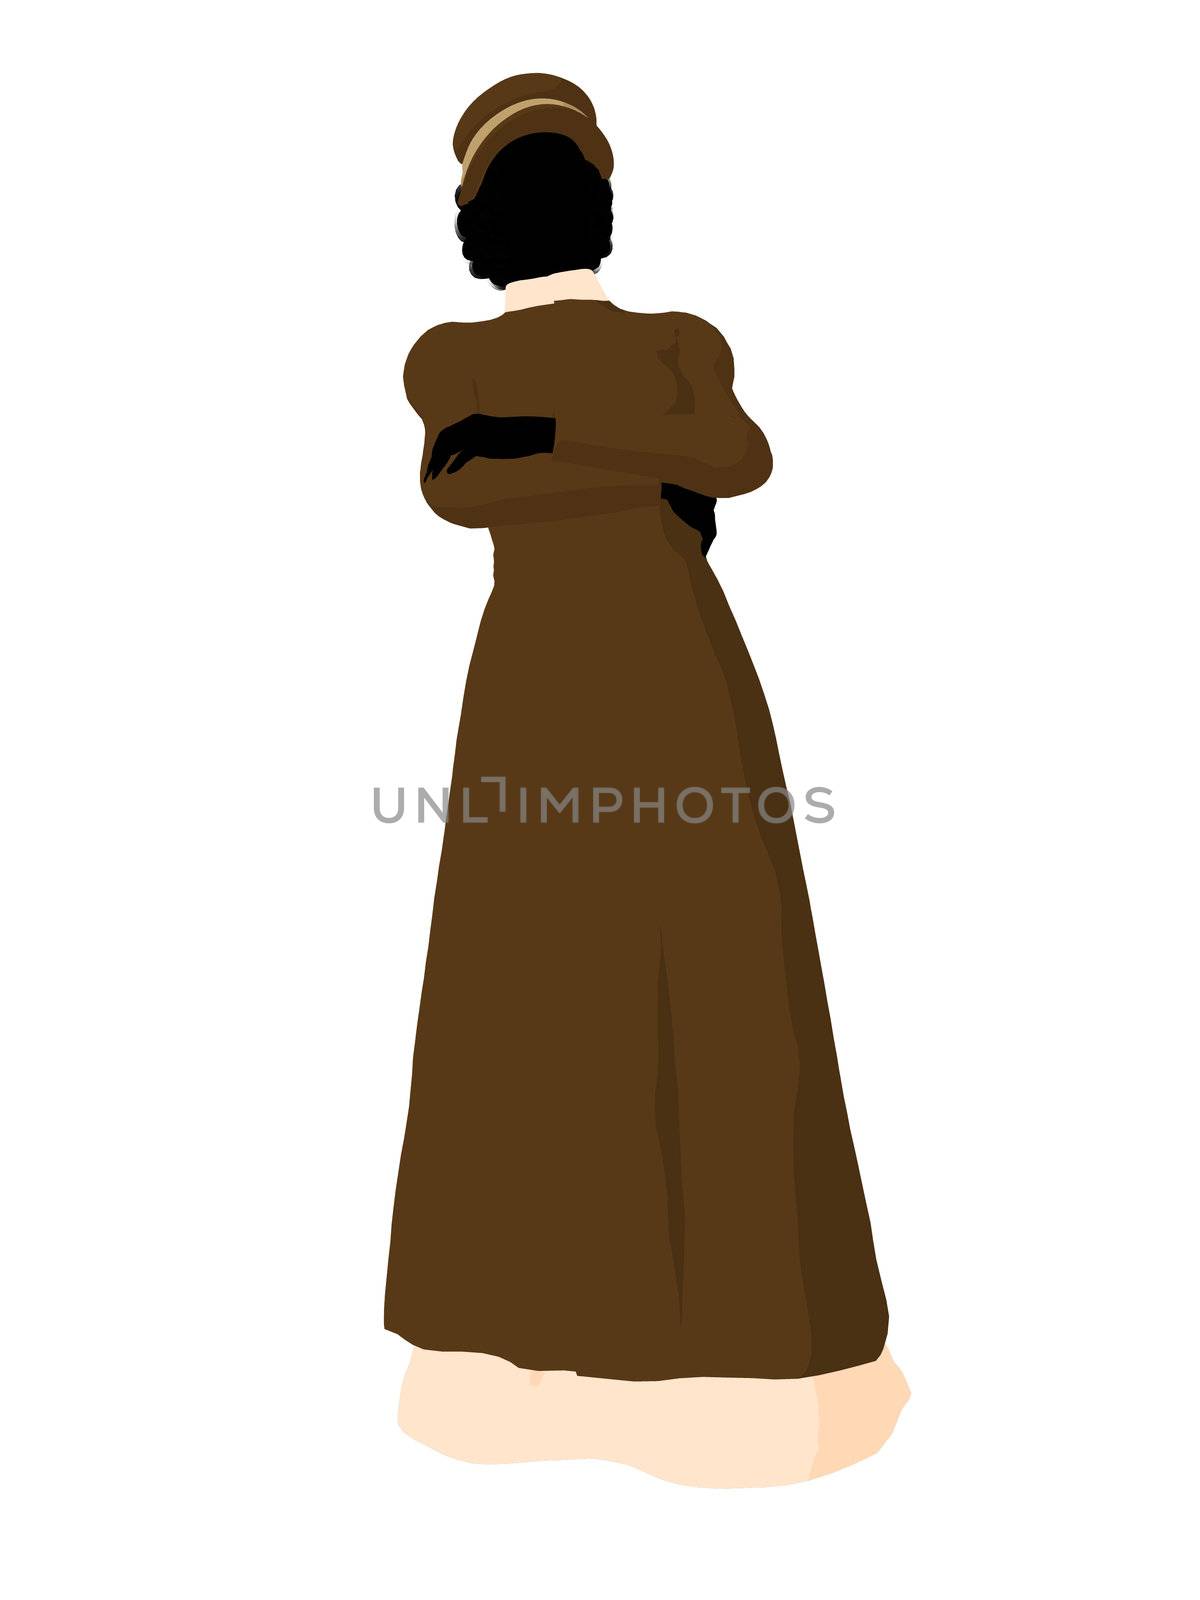 Victorian woman art illustration silhouette on a white background